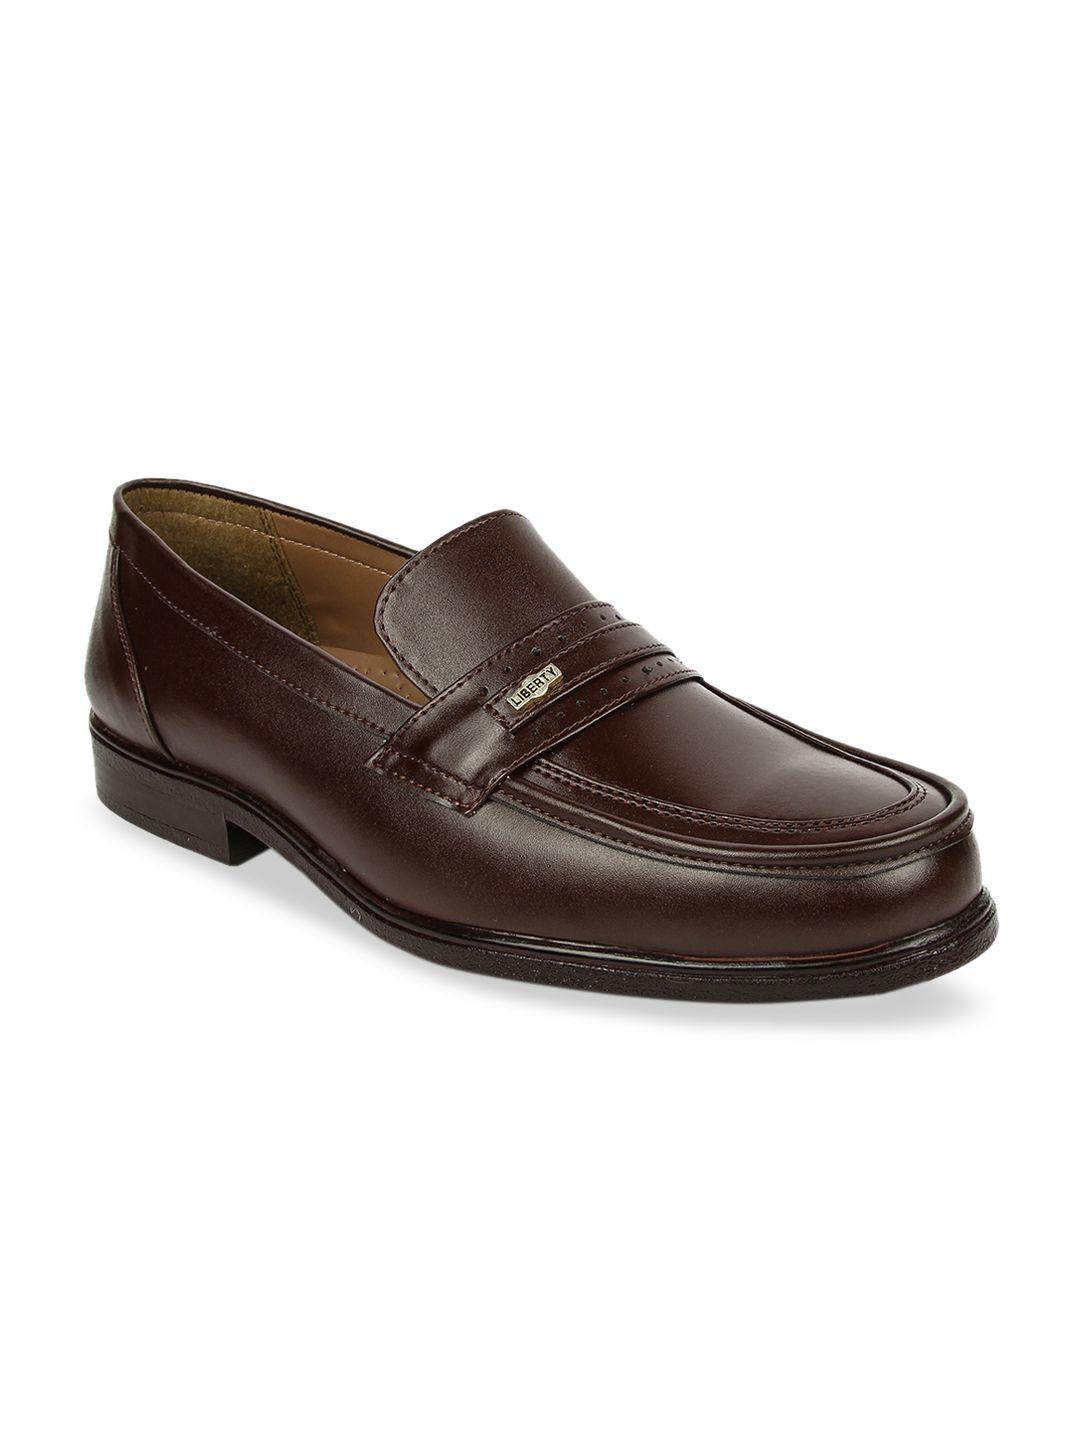 liberty men brown solid leather formal loafers